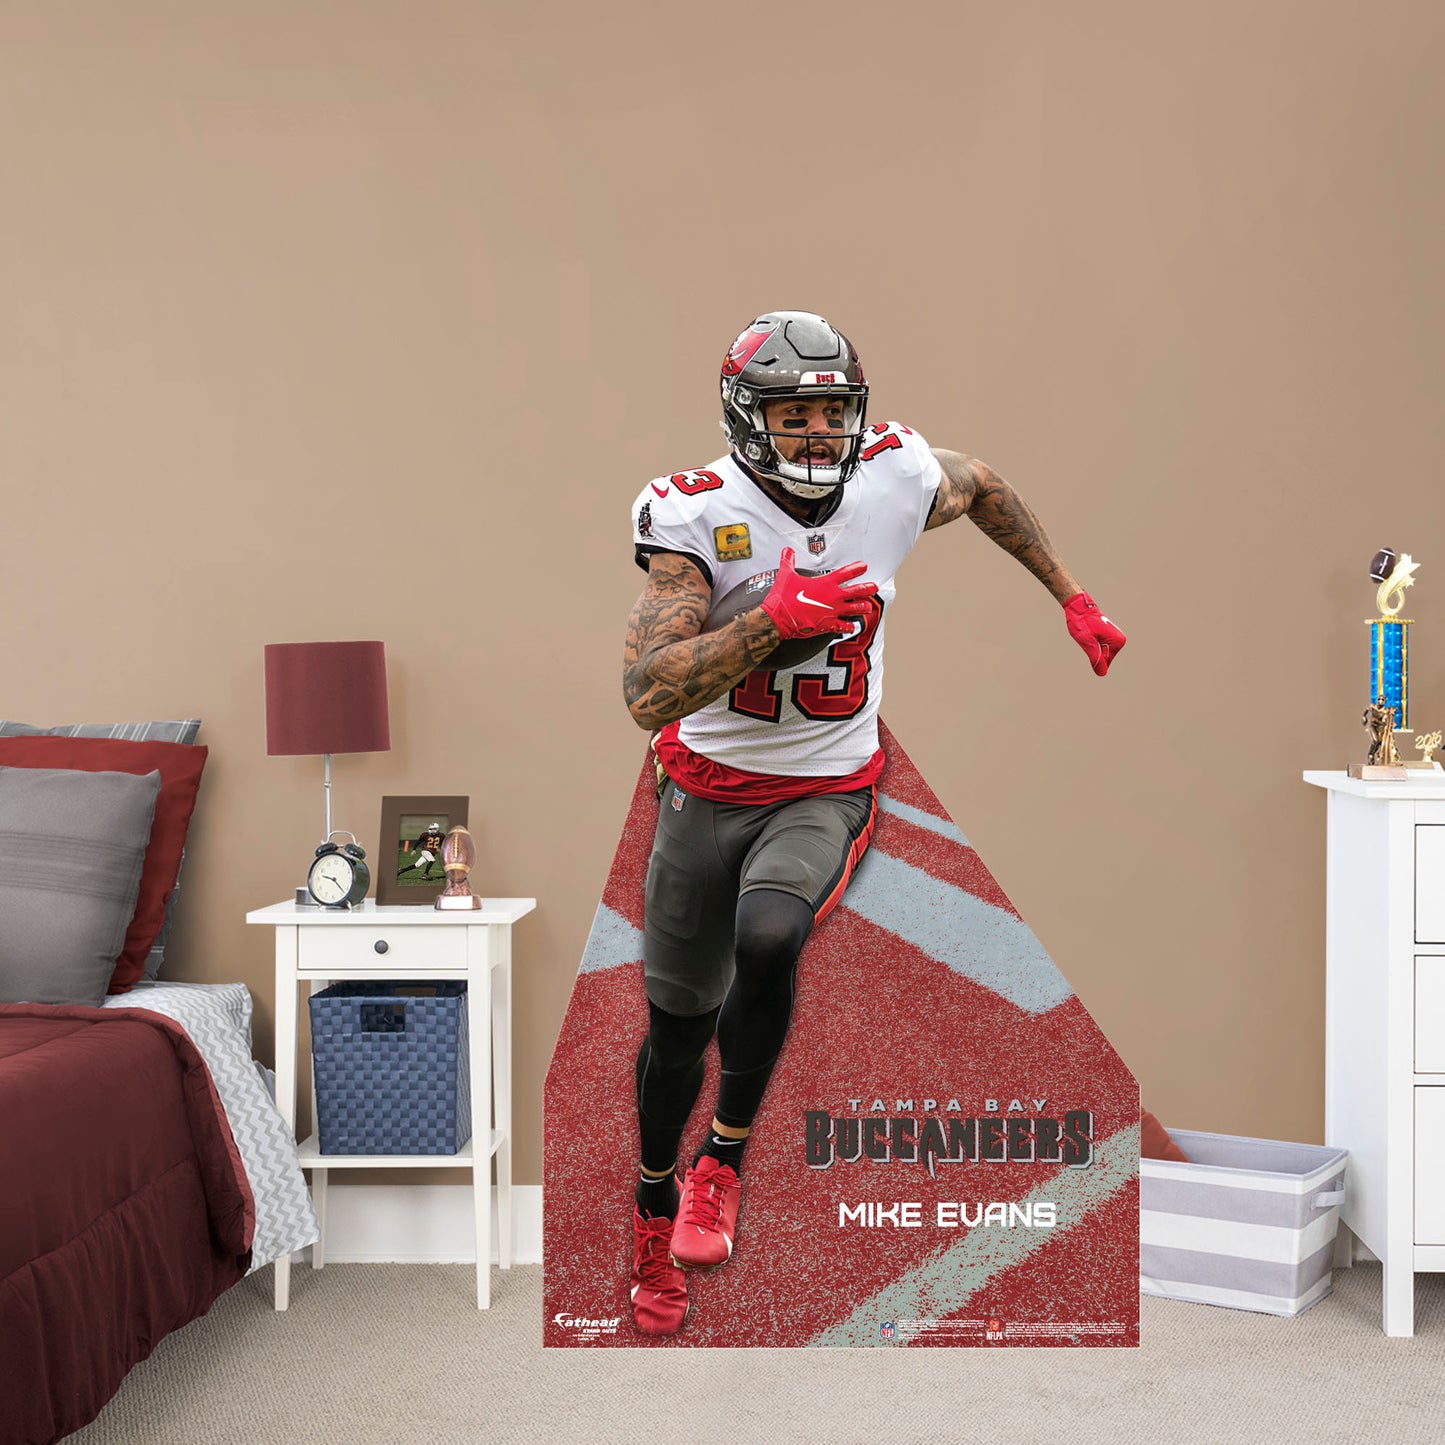 Tampa Bay Buccaneers: Mike Evans 2022  Life-Size   Foam Core Cutout  - Officially Licensed NFL    Stand Out